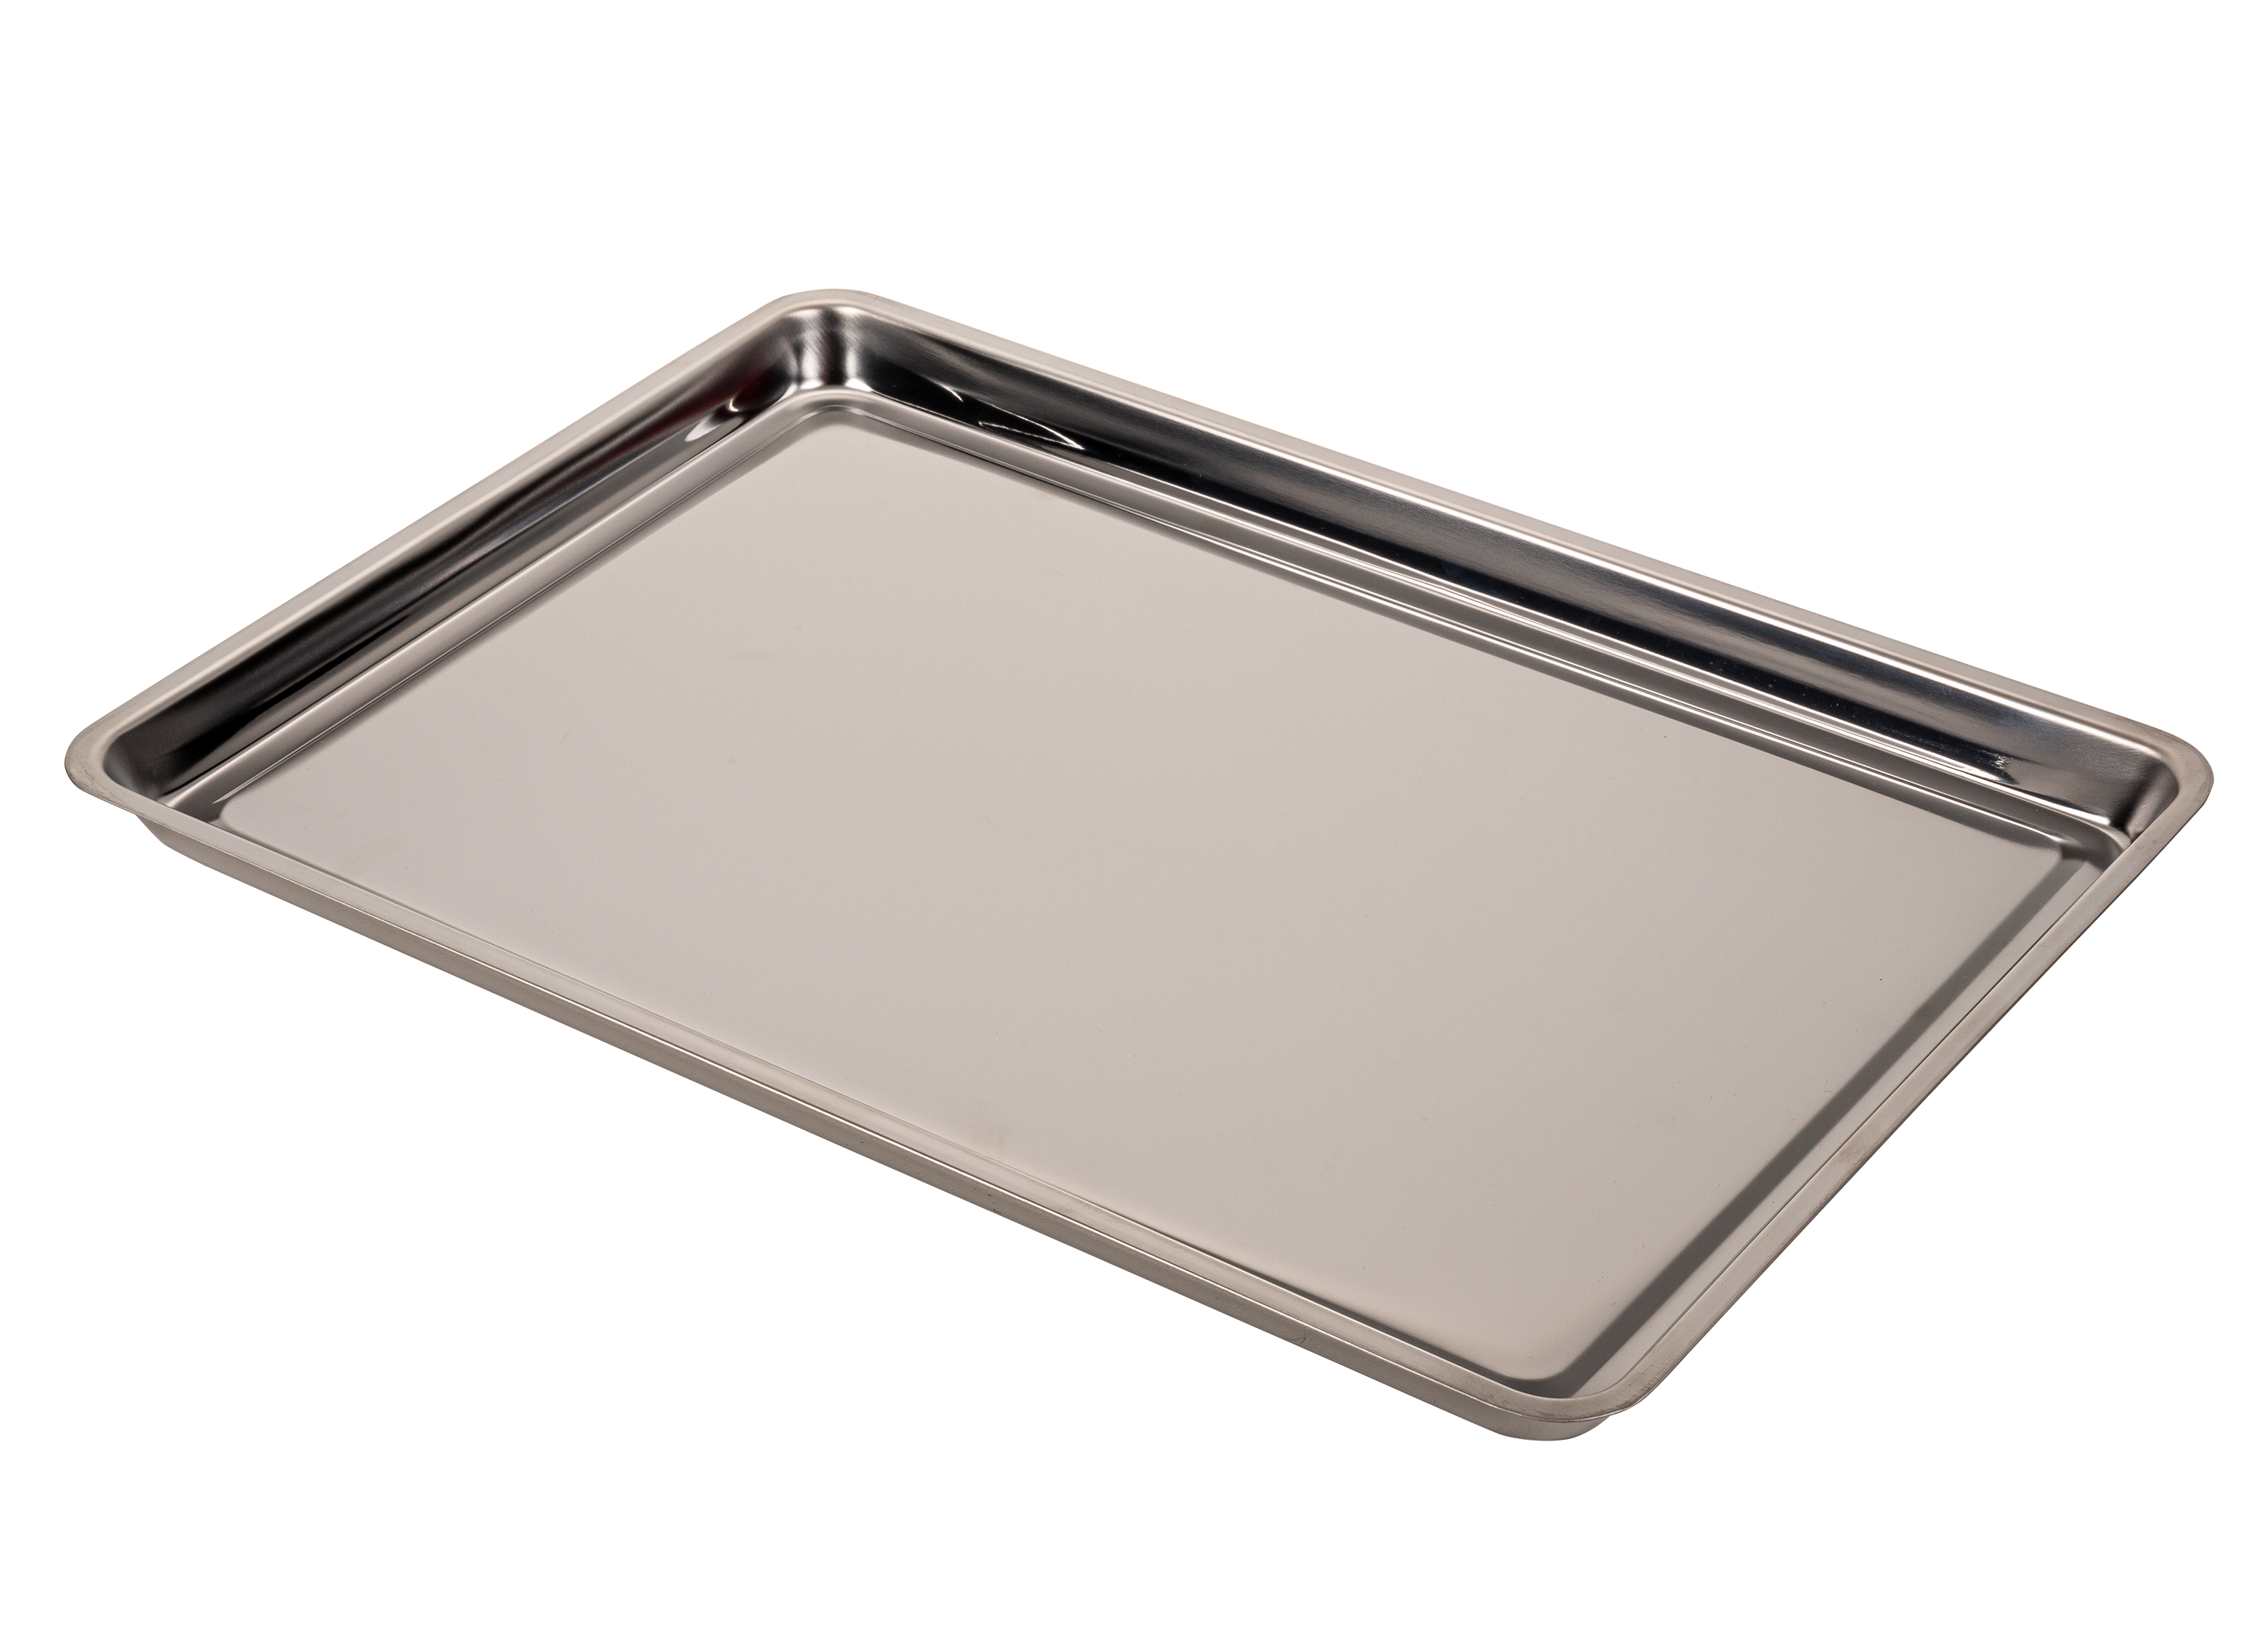 https://crdms.images.consumerreports.org/prod/products/cr/models/404177-sheet-pans-fox-run-jelly-roll-pan-10022111.png